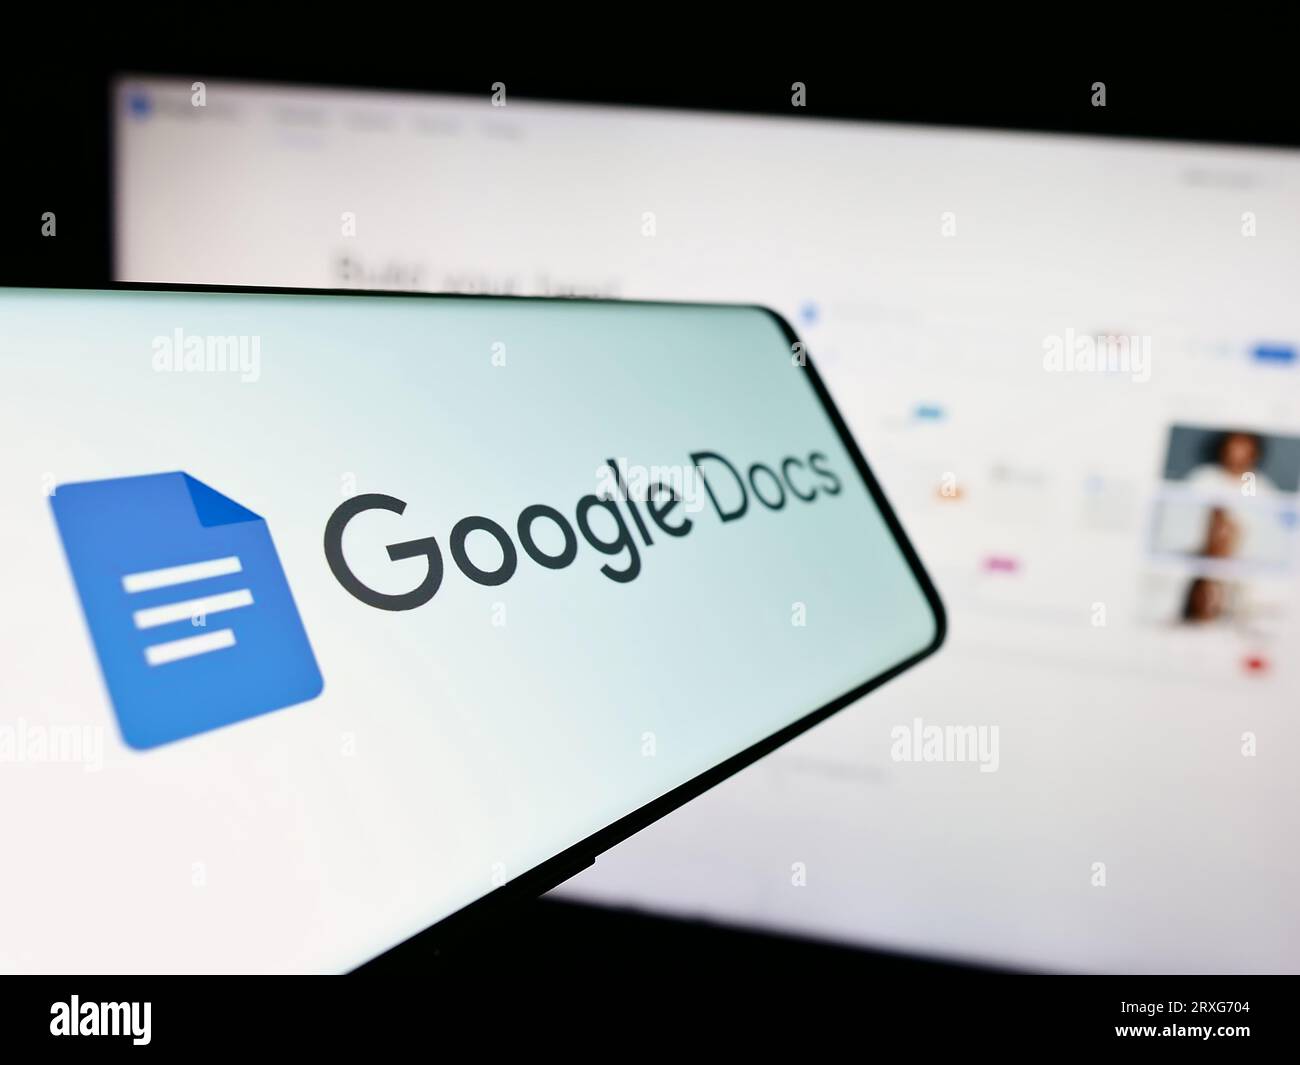 Mobile phone with logo of online word processing product Google Docs on screen in front of website. Focus on center-left of phone display. Stock Photo